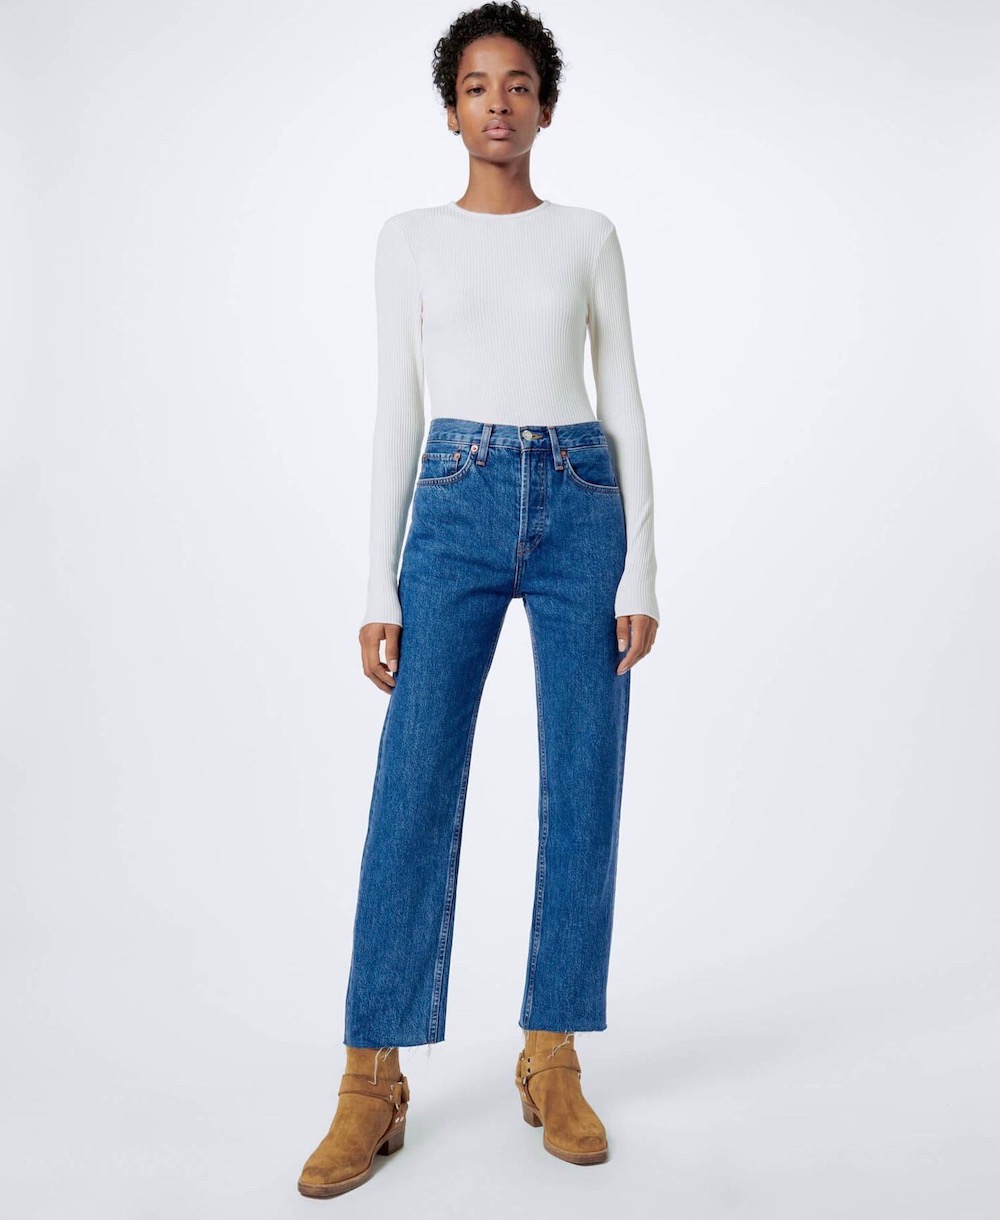 Fall 2020 Denim Trends You Need to Know - theFashionSpot